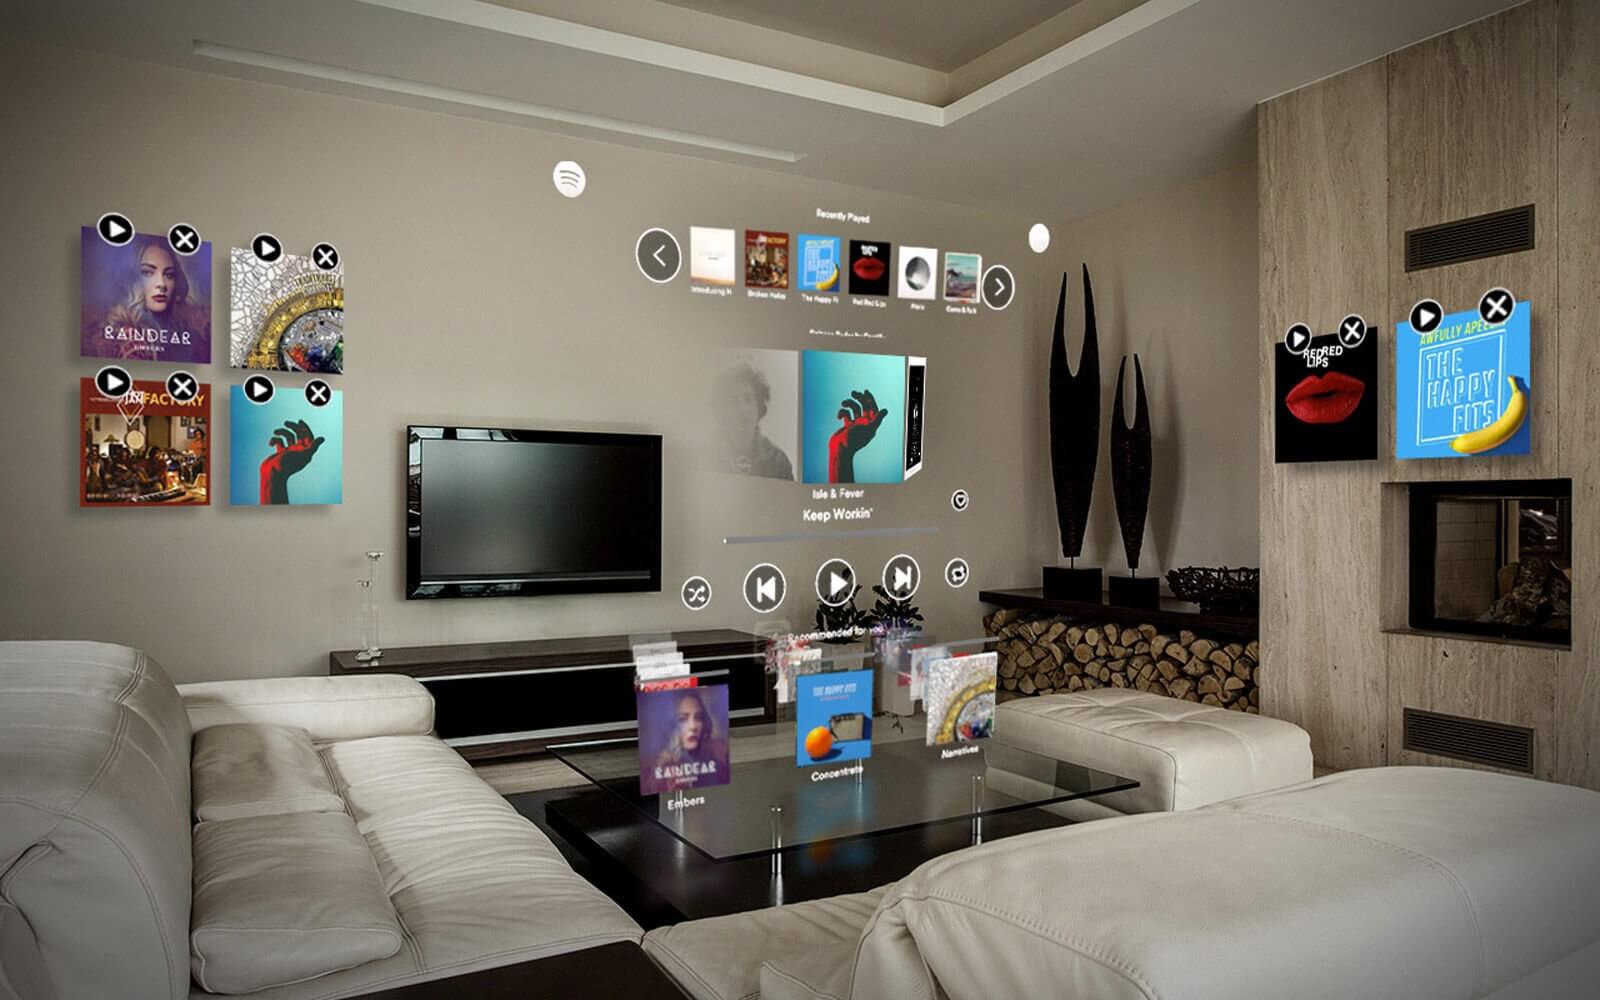 Magic Leap's Spotify app lets you create virtual playlists for different rooms